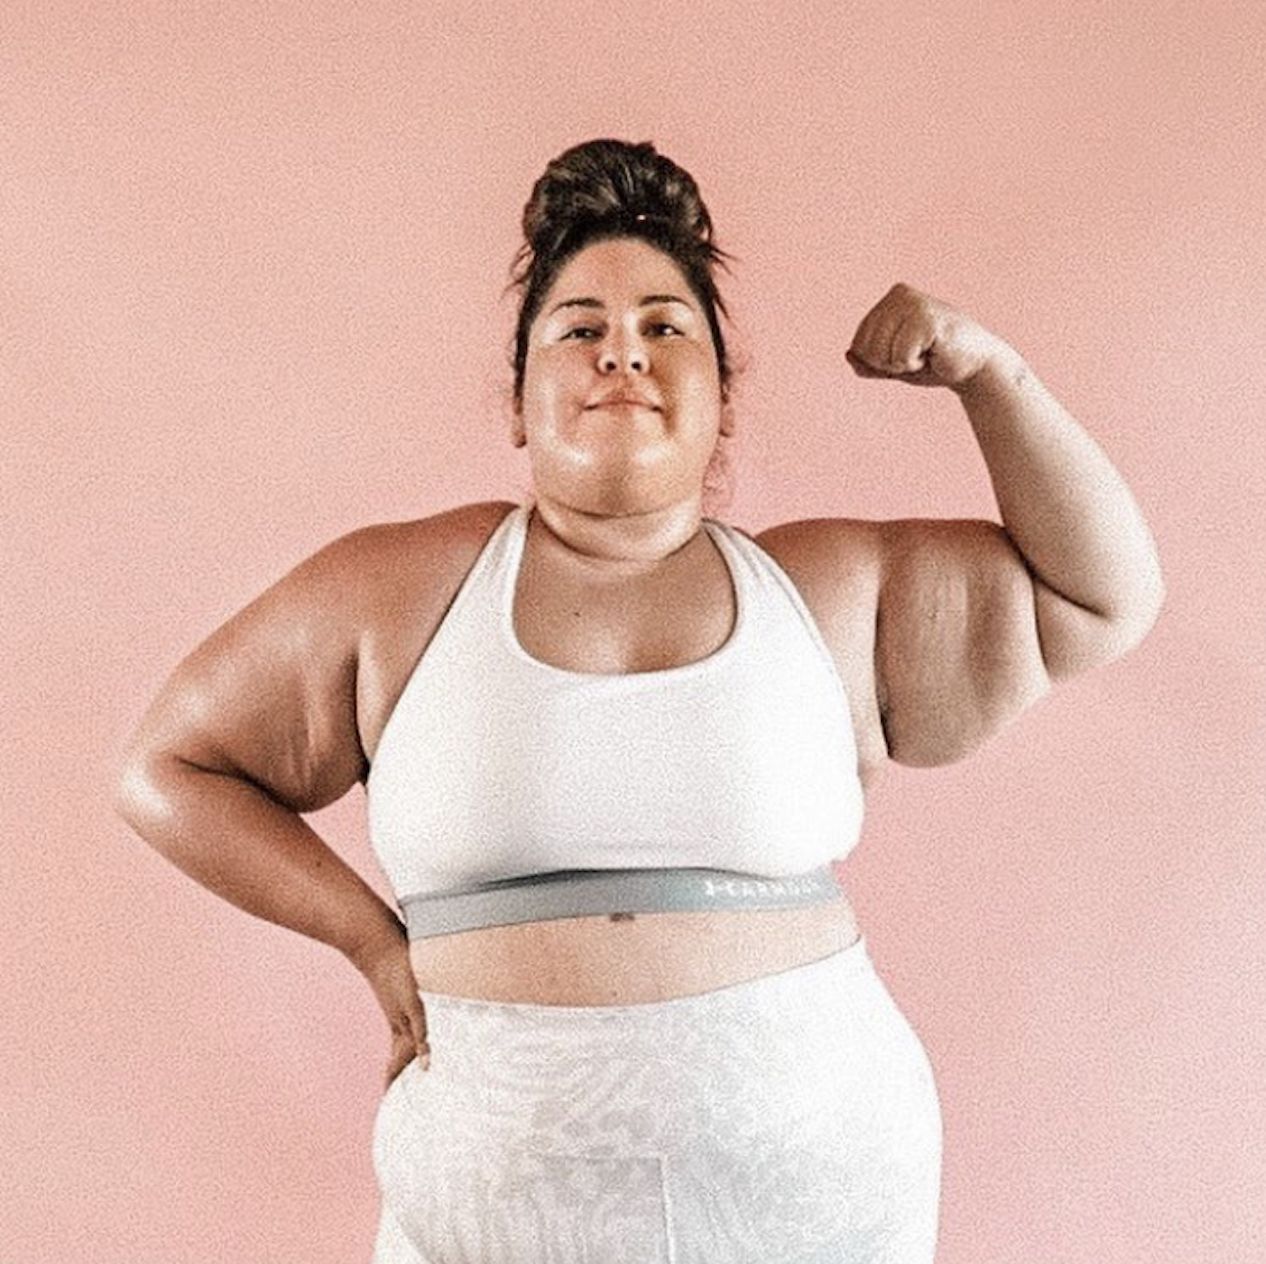 Influencer and athlete Meg Boggs on her viral post on fat bodies